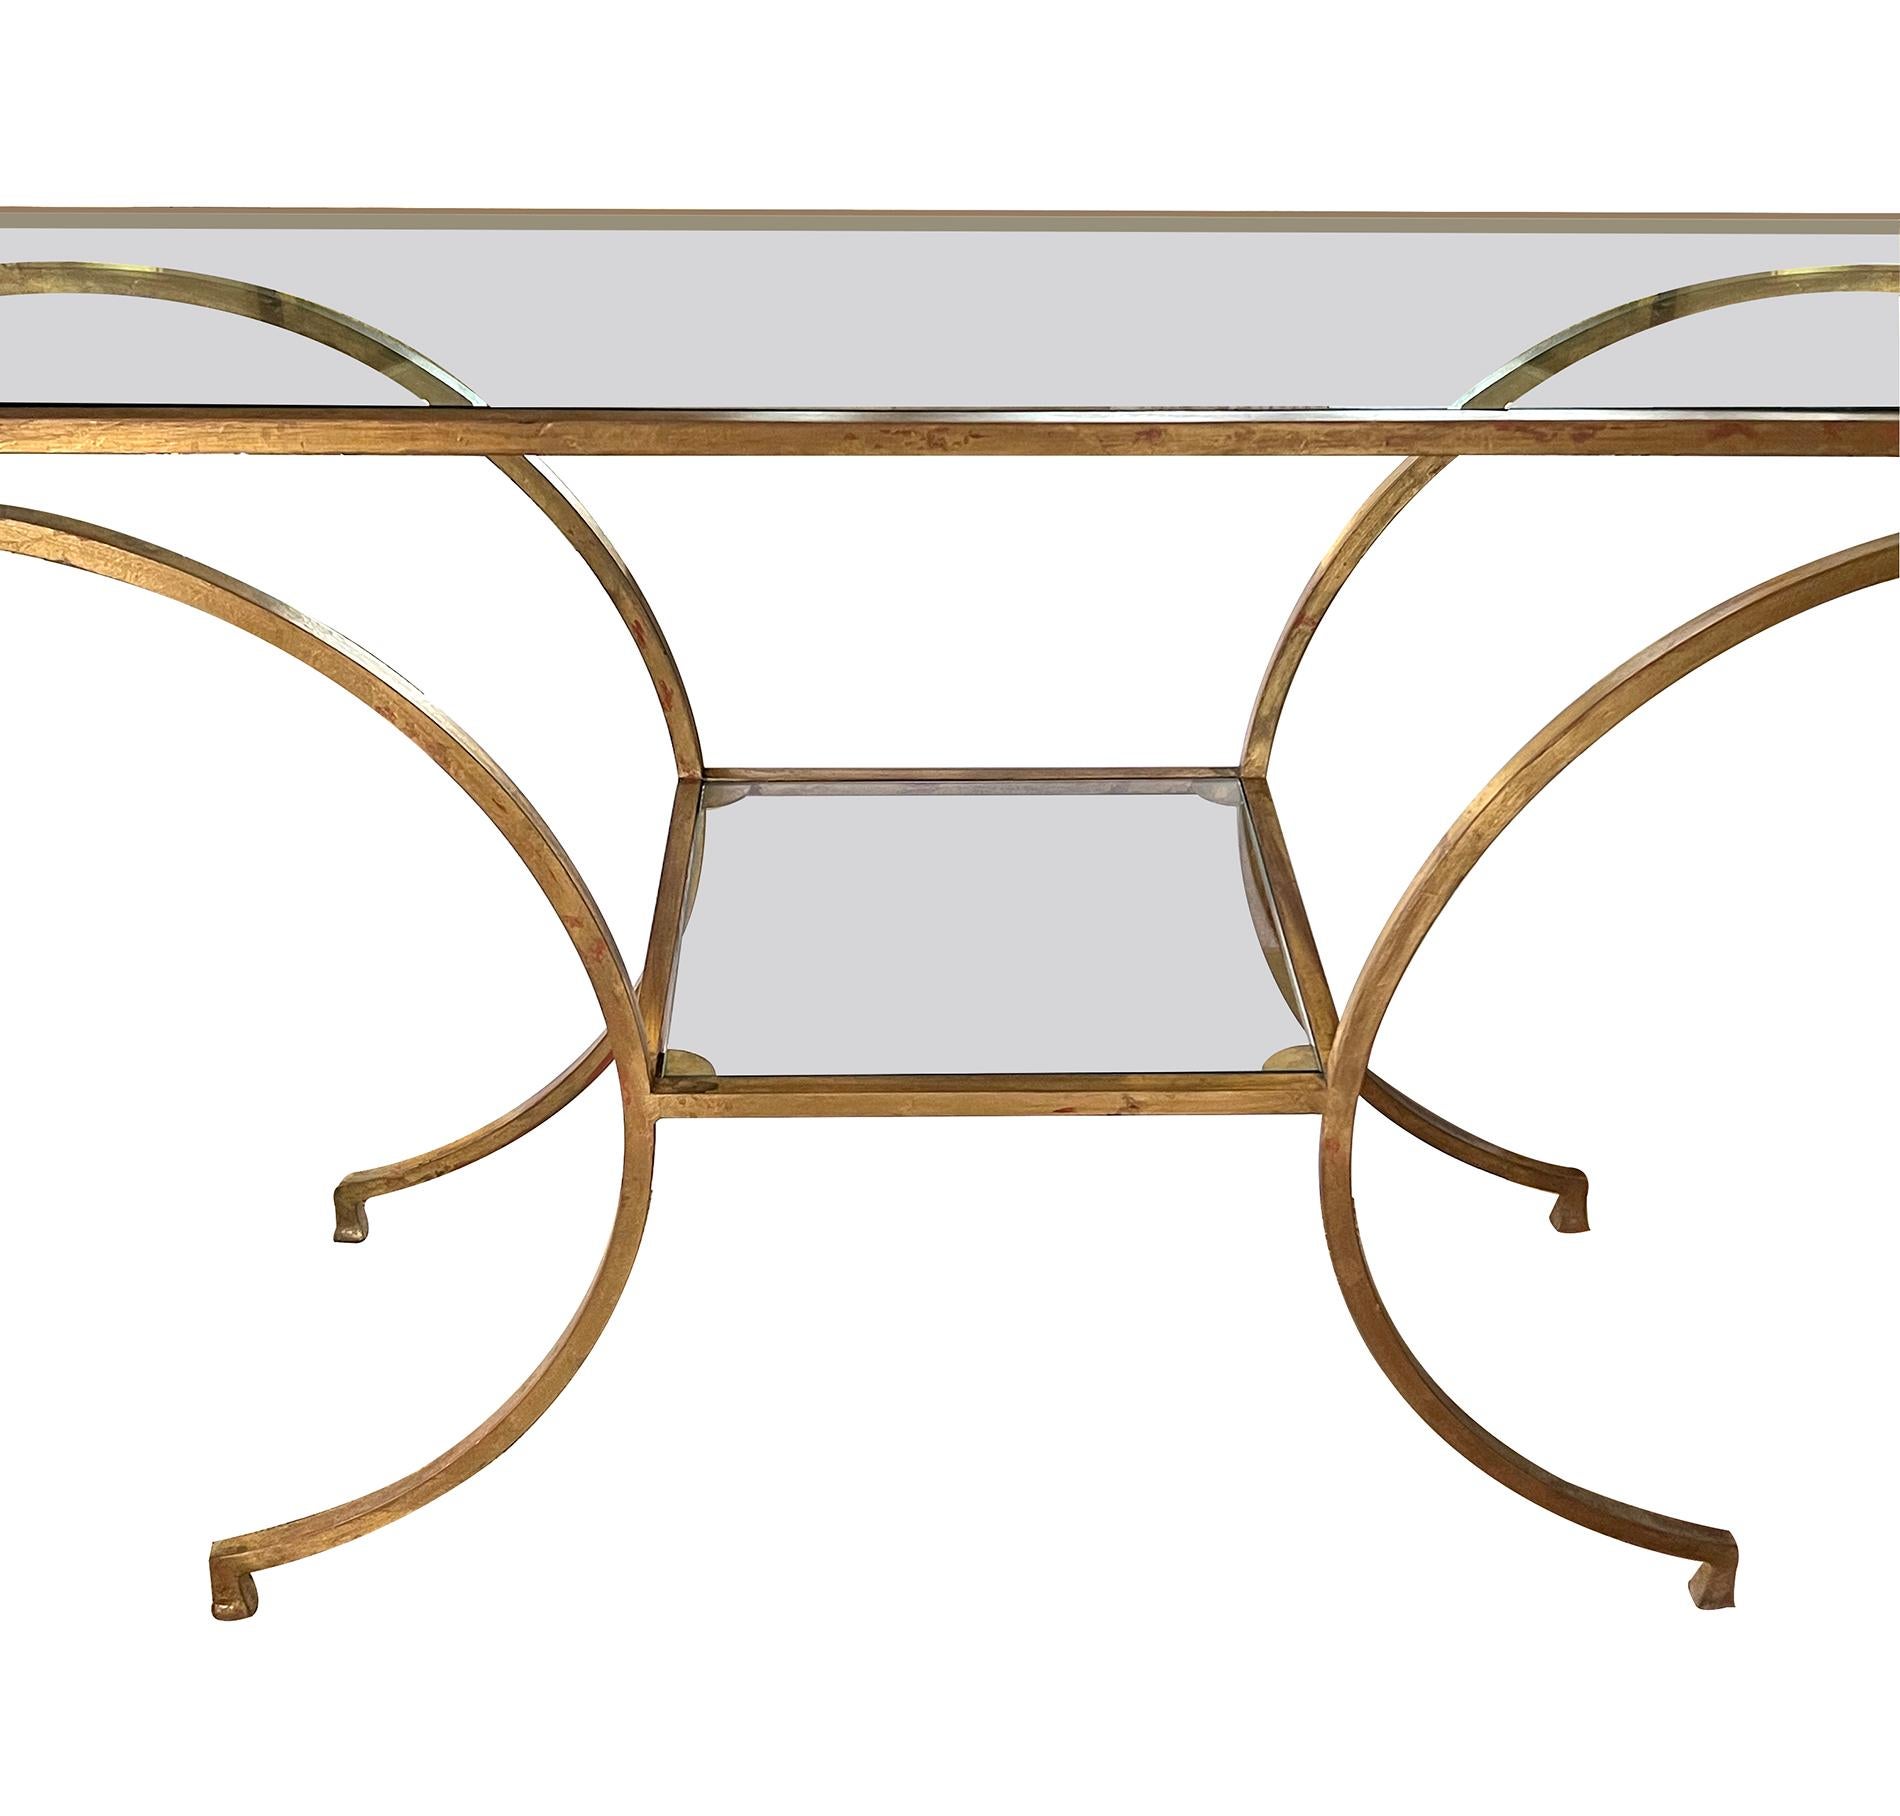 Mid-20th Century An Italian Greco Roman Style Gilt-metal Console Table with Glass Top and Shelf  For Sale